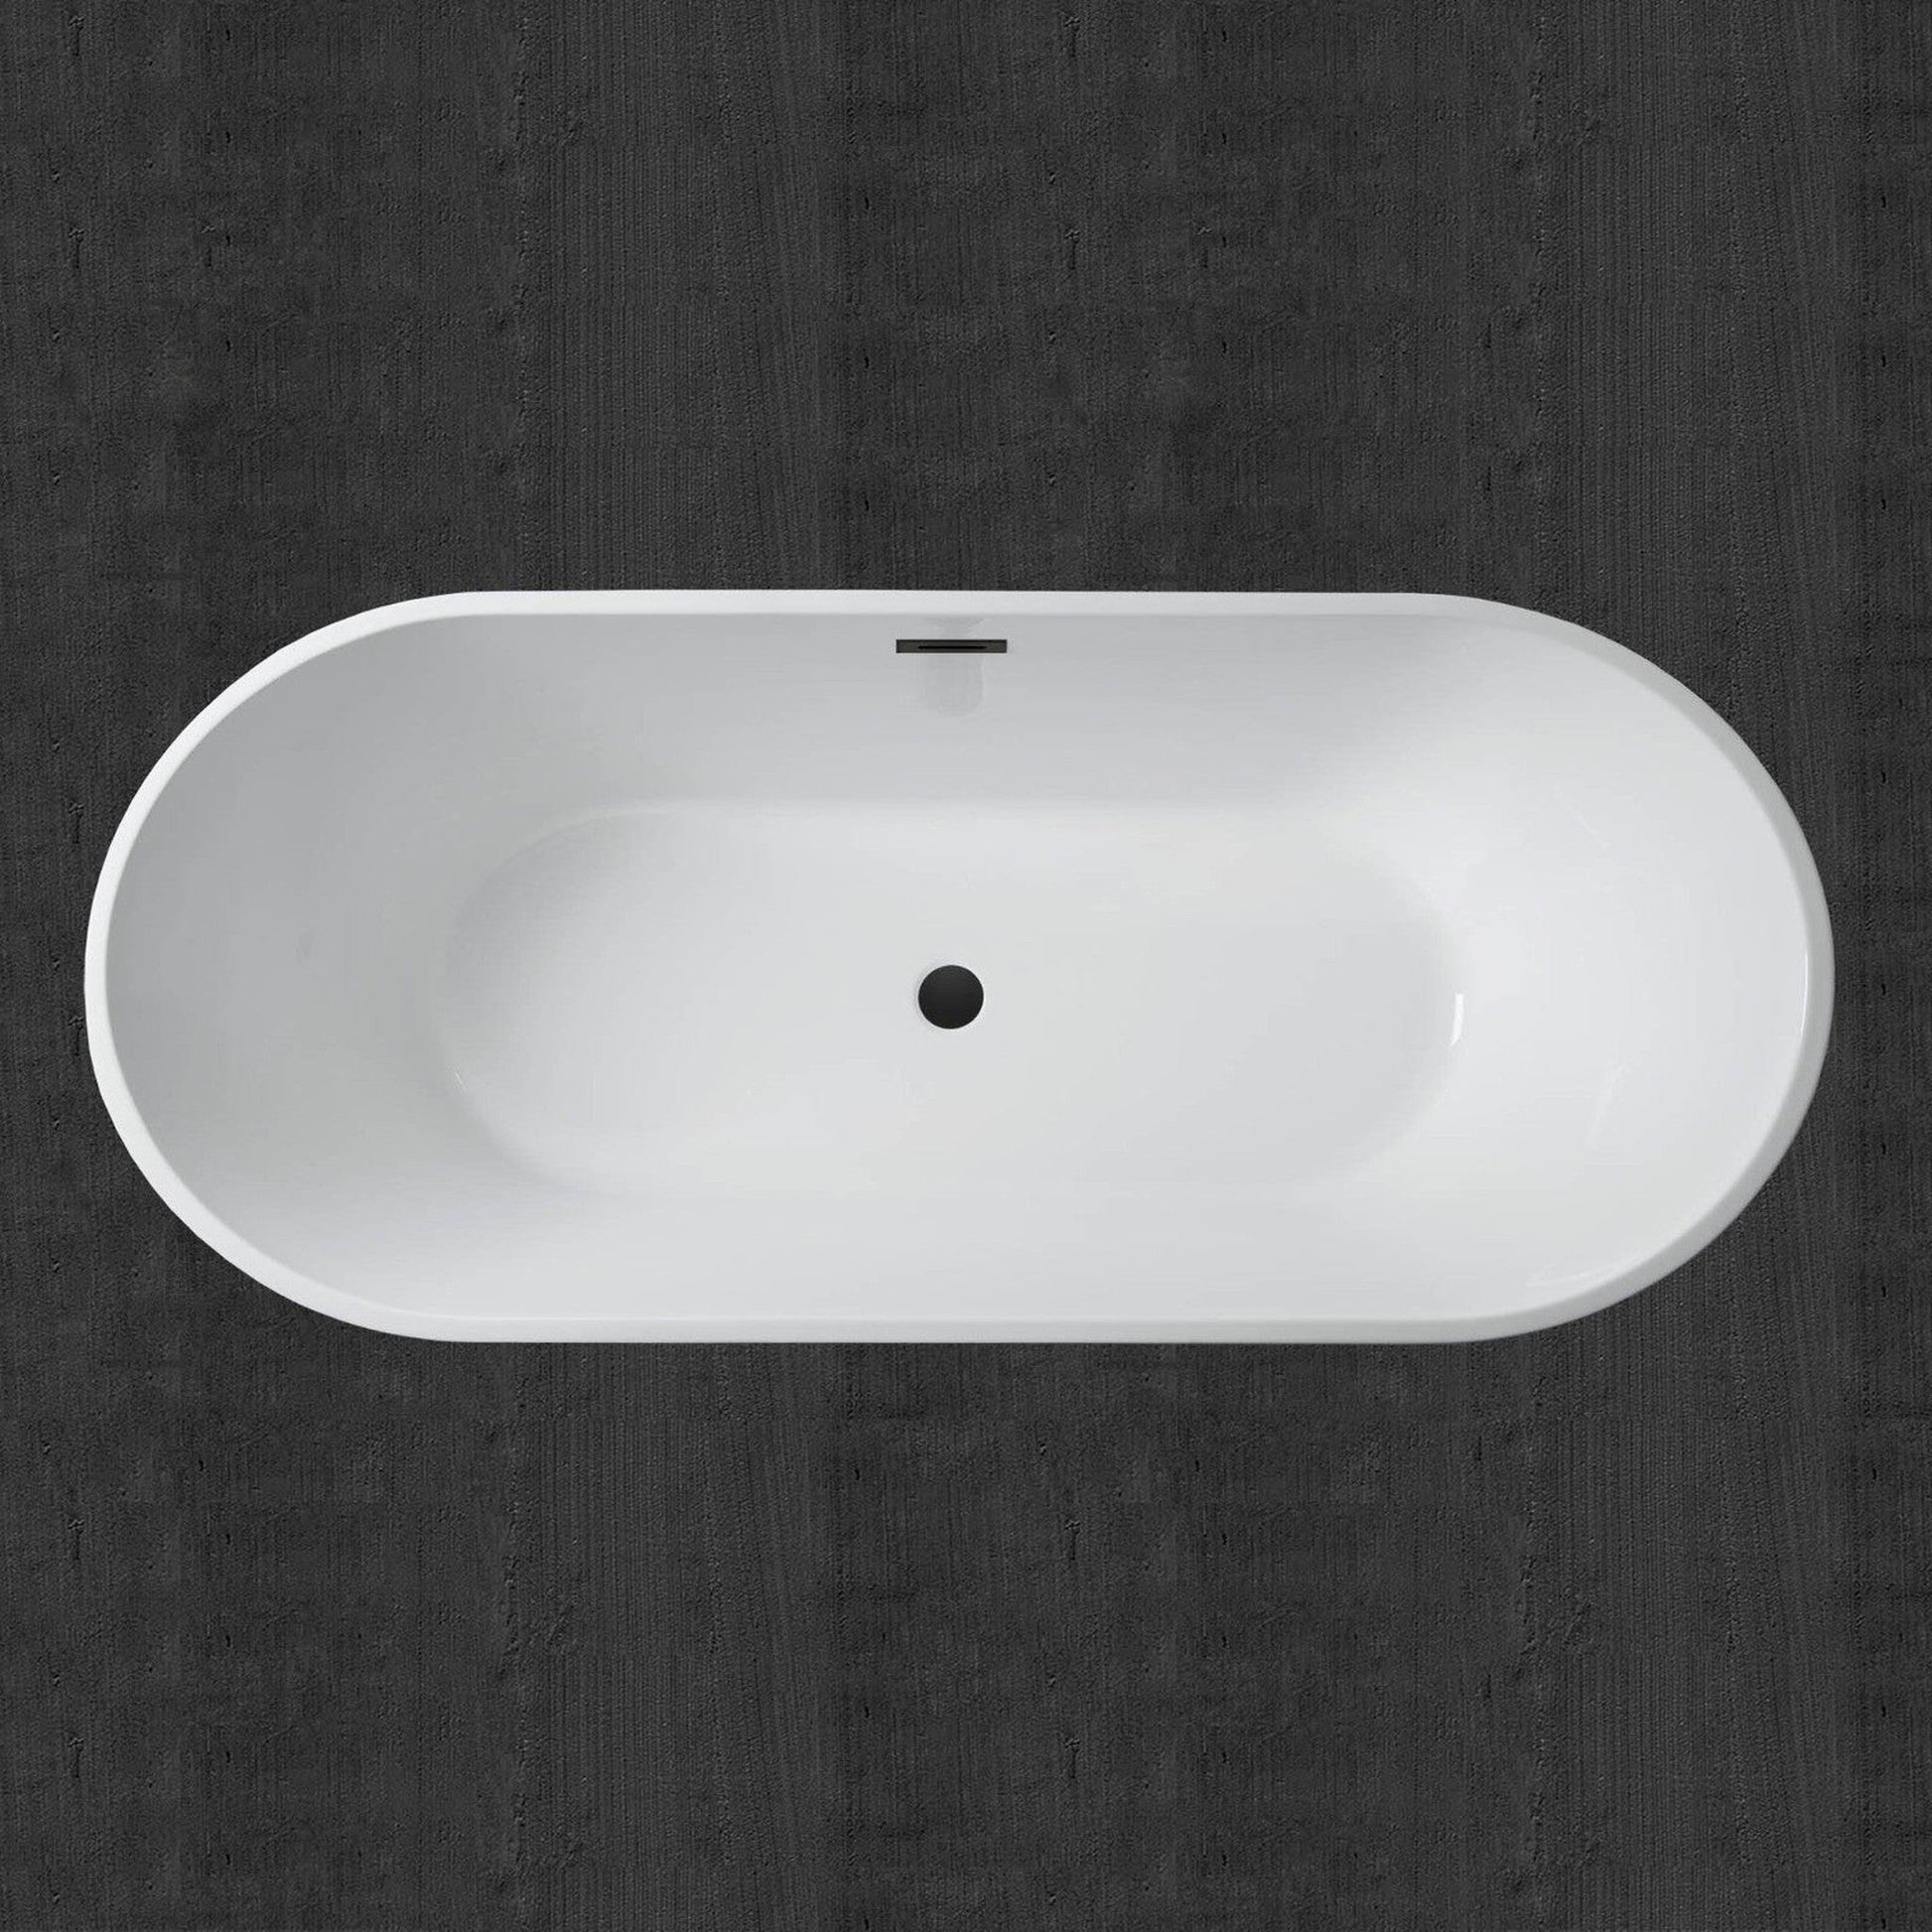 WoodBridge 71" White Acrylic Freestanding Contemporary Soaking Bathtub With Matte Black Drain, Overflow, F0037MB Tub Filler and Caddy Tray